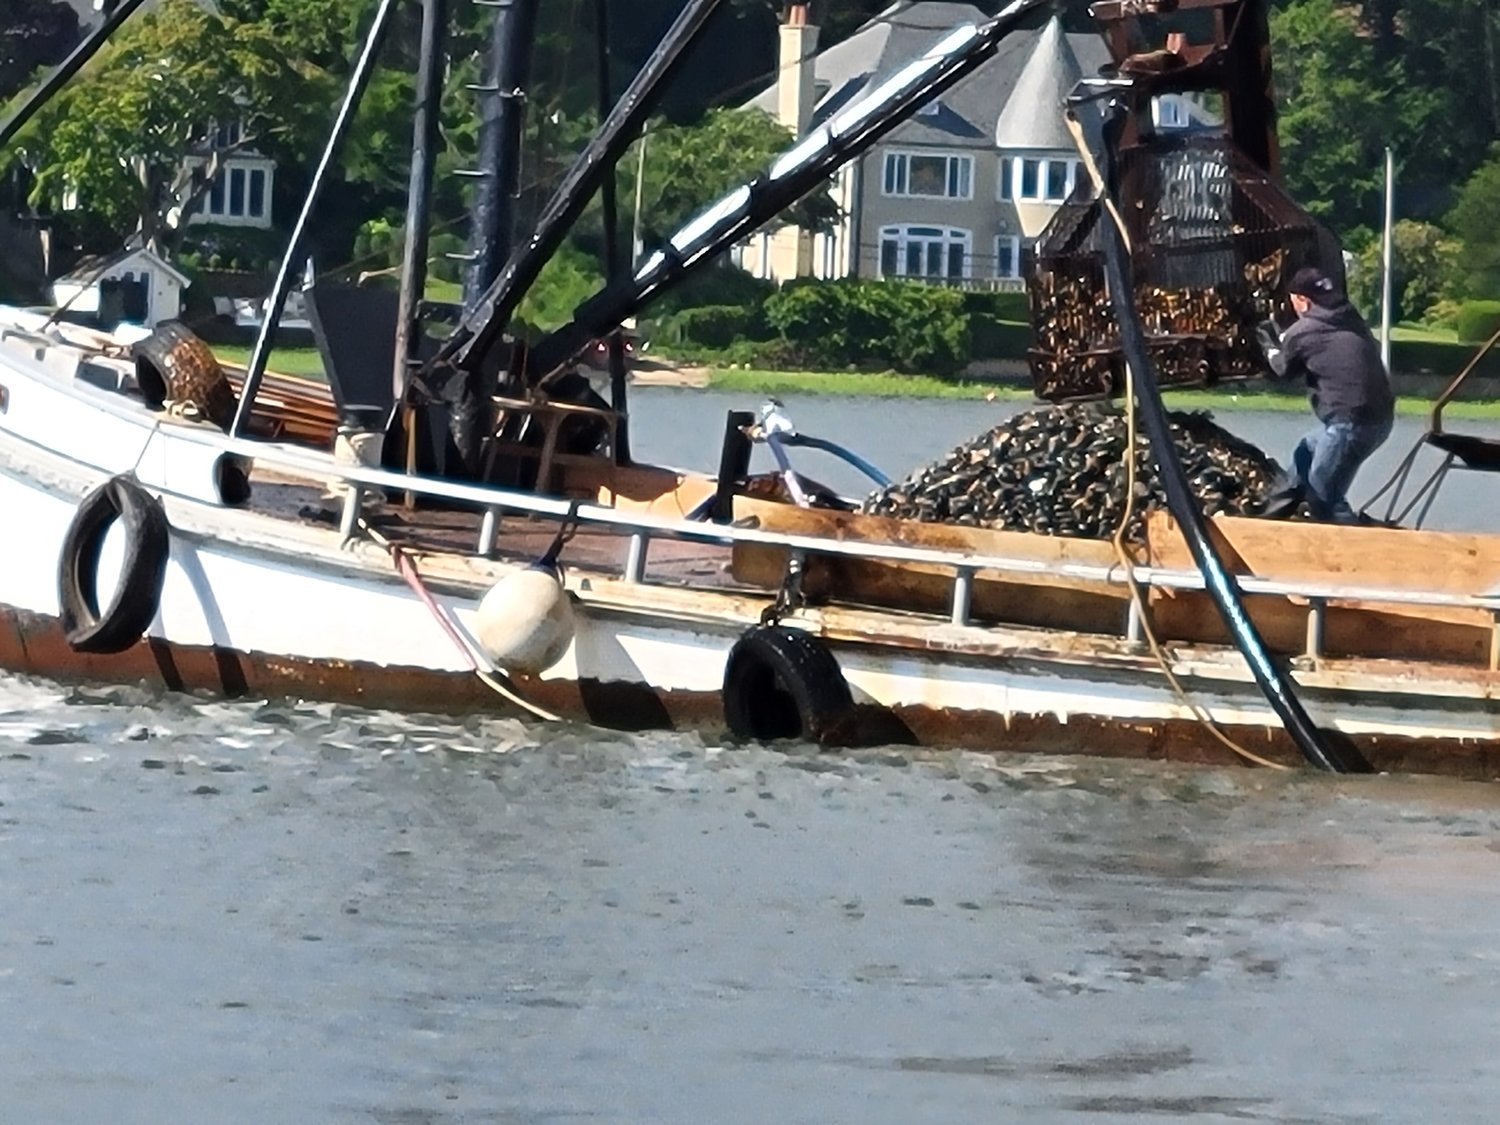 Frank M. Flower & Sons is hydraulically dredging Mill Neck Creek for clams, which the Town of Oyster Bay has been trying to stop the company from doing, because officials fear that it will destroy an important area for spawning.